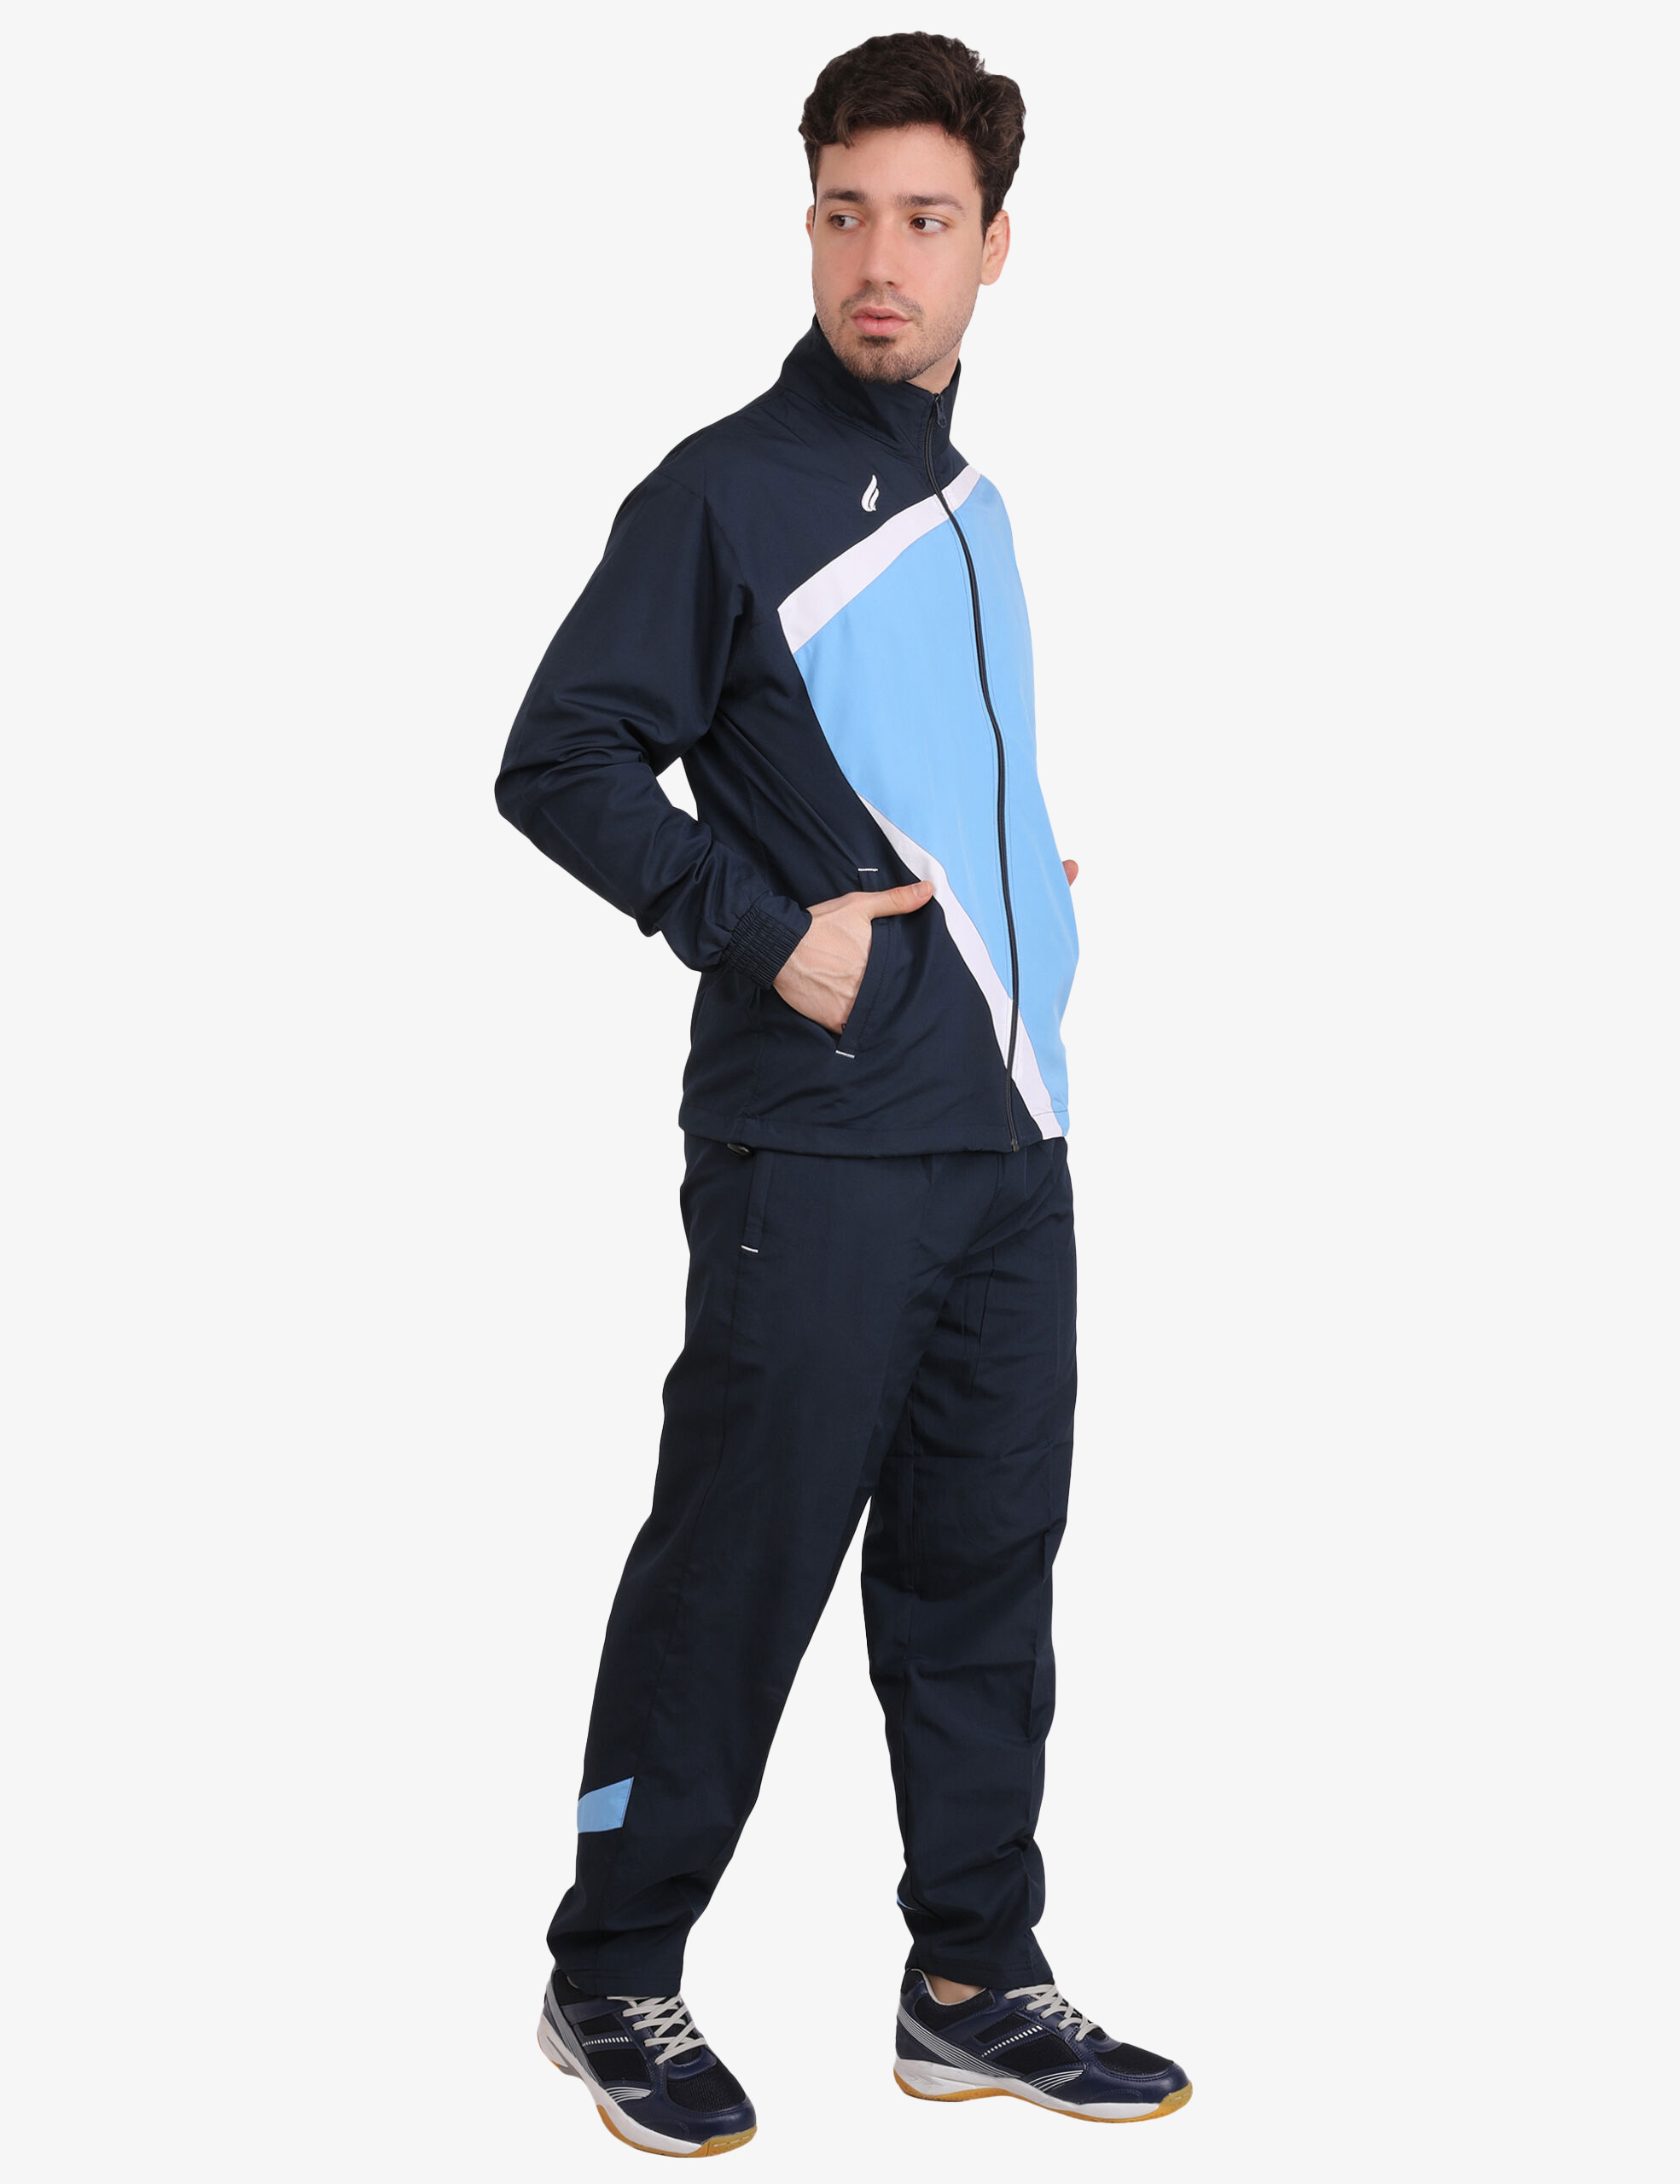 ASI Flair Track Suit for Men Navy Blue & Sky Blue